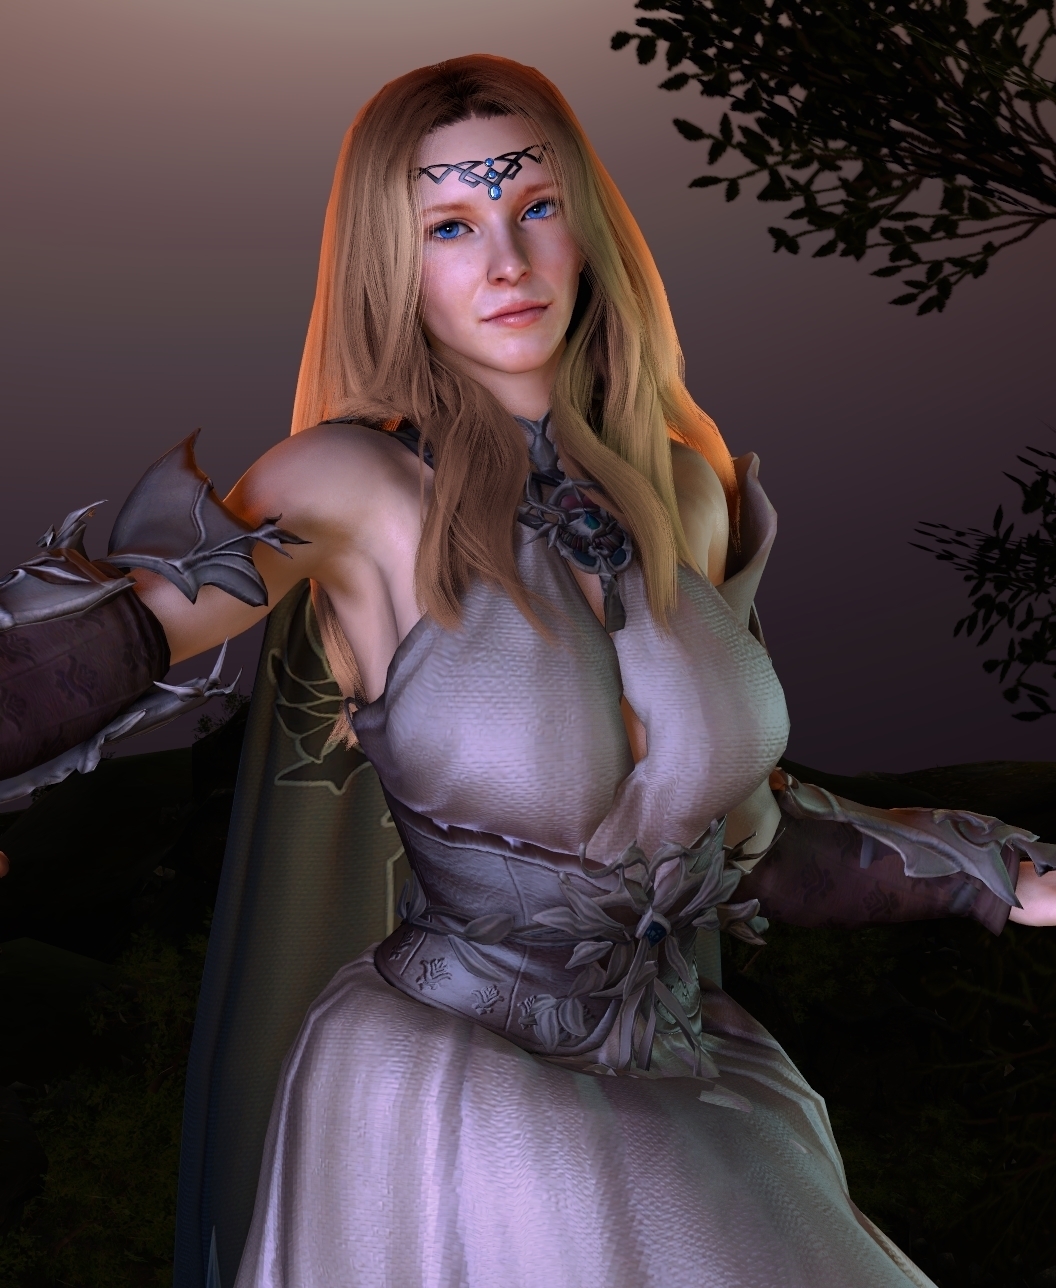 Galadriel - The Rings of Power The Lord Of The Rings Pawg Busty Big Tits Big Ass Thicc Thick Thighs Fit Fantasy Elf 2